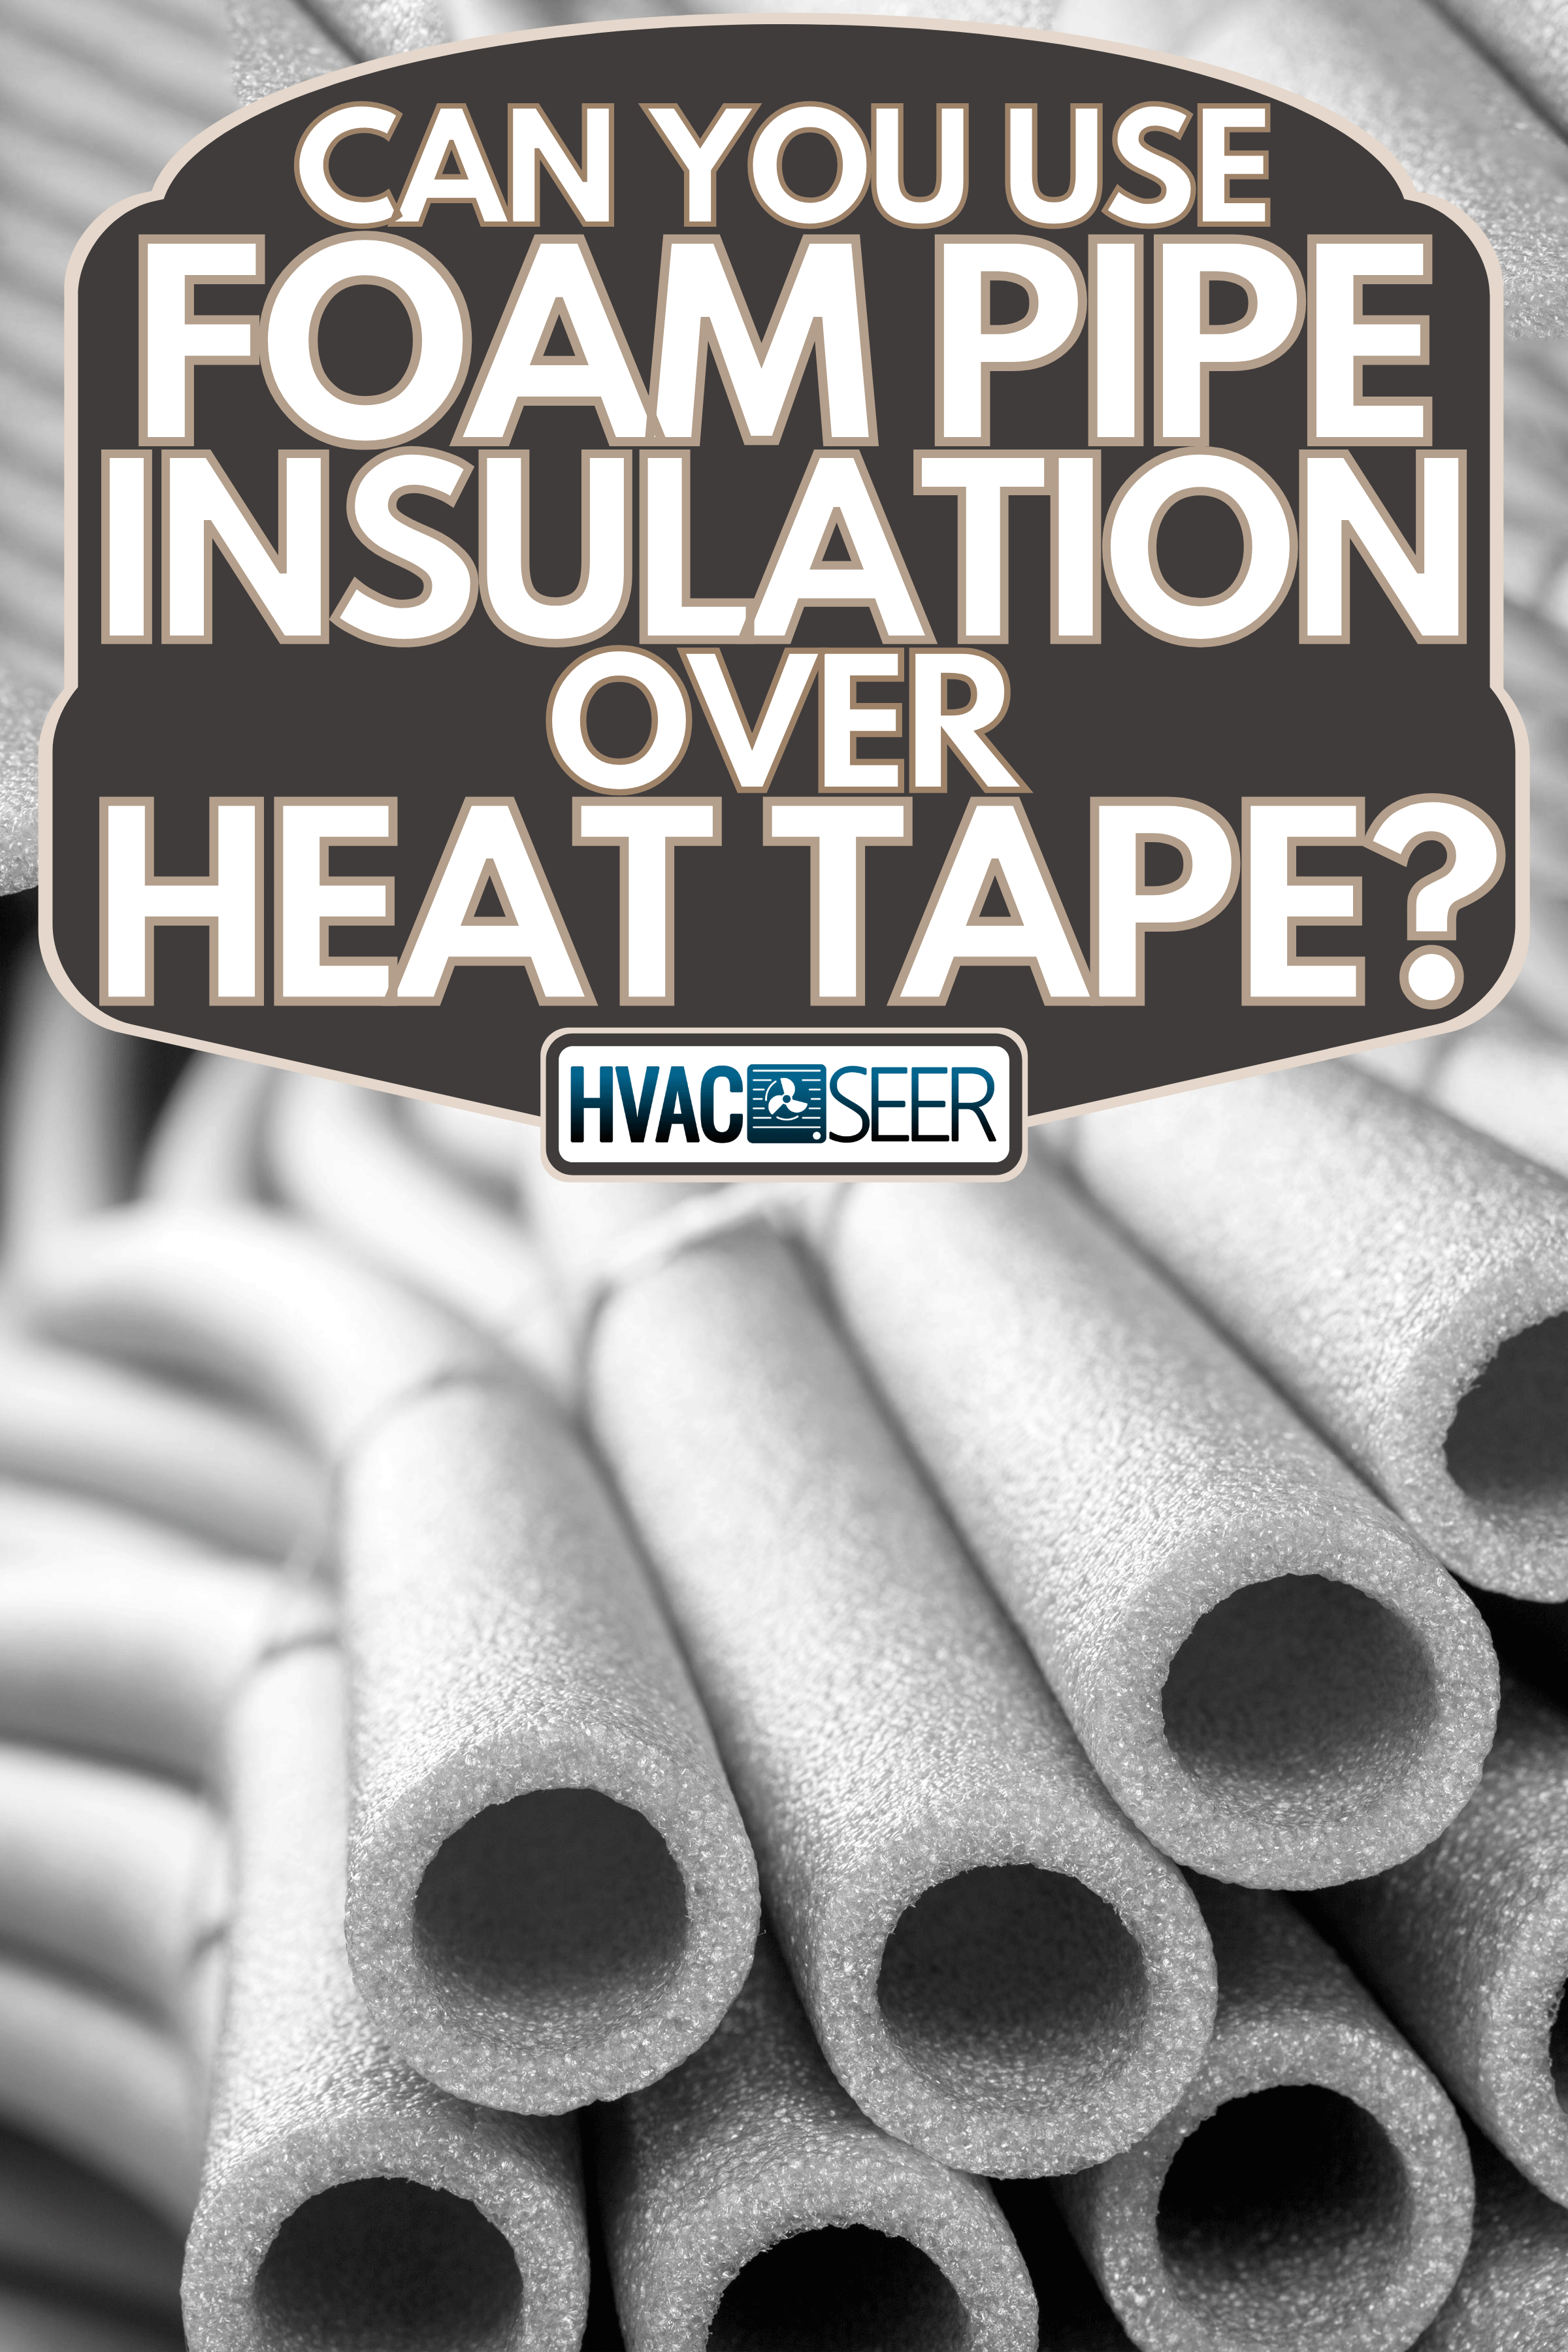 Insulation for pipes, Can You Use Foam Pipe Insulation Over Heat Tape?